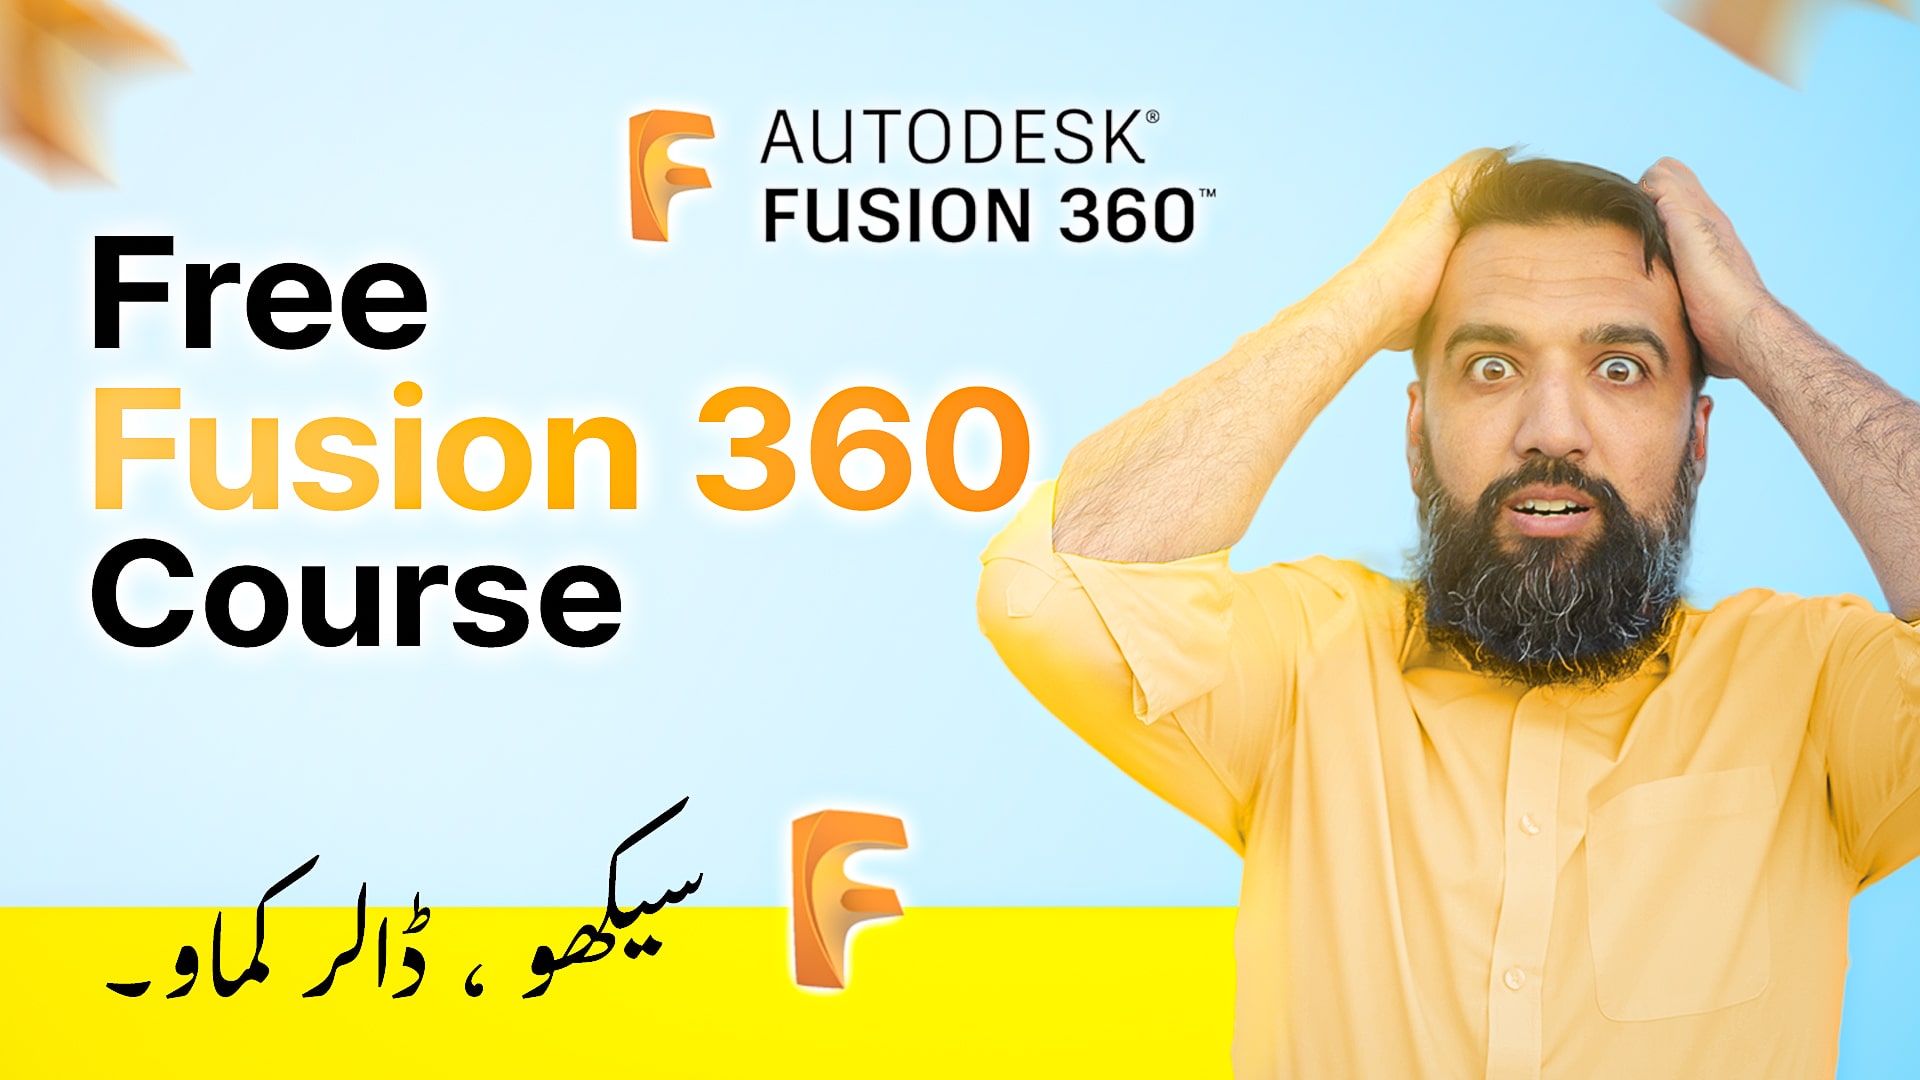  fusion-360-course-for-beginners-3d-designers-by-azadchaiwala-64f85b72c2f32426437096.jpg 